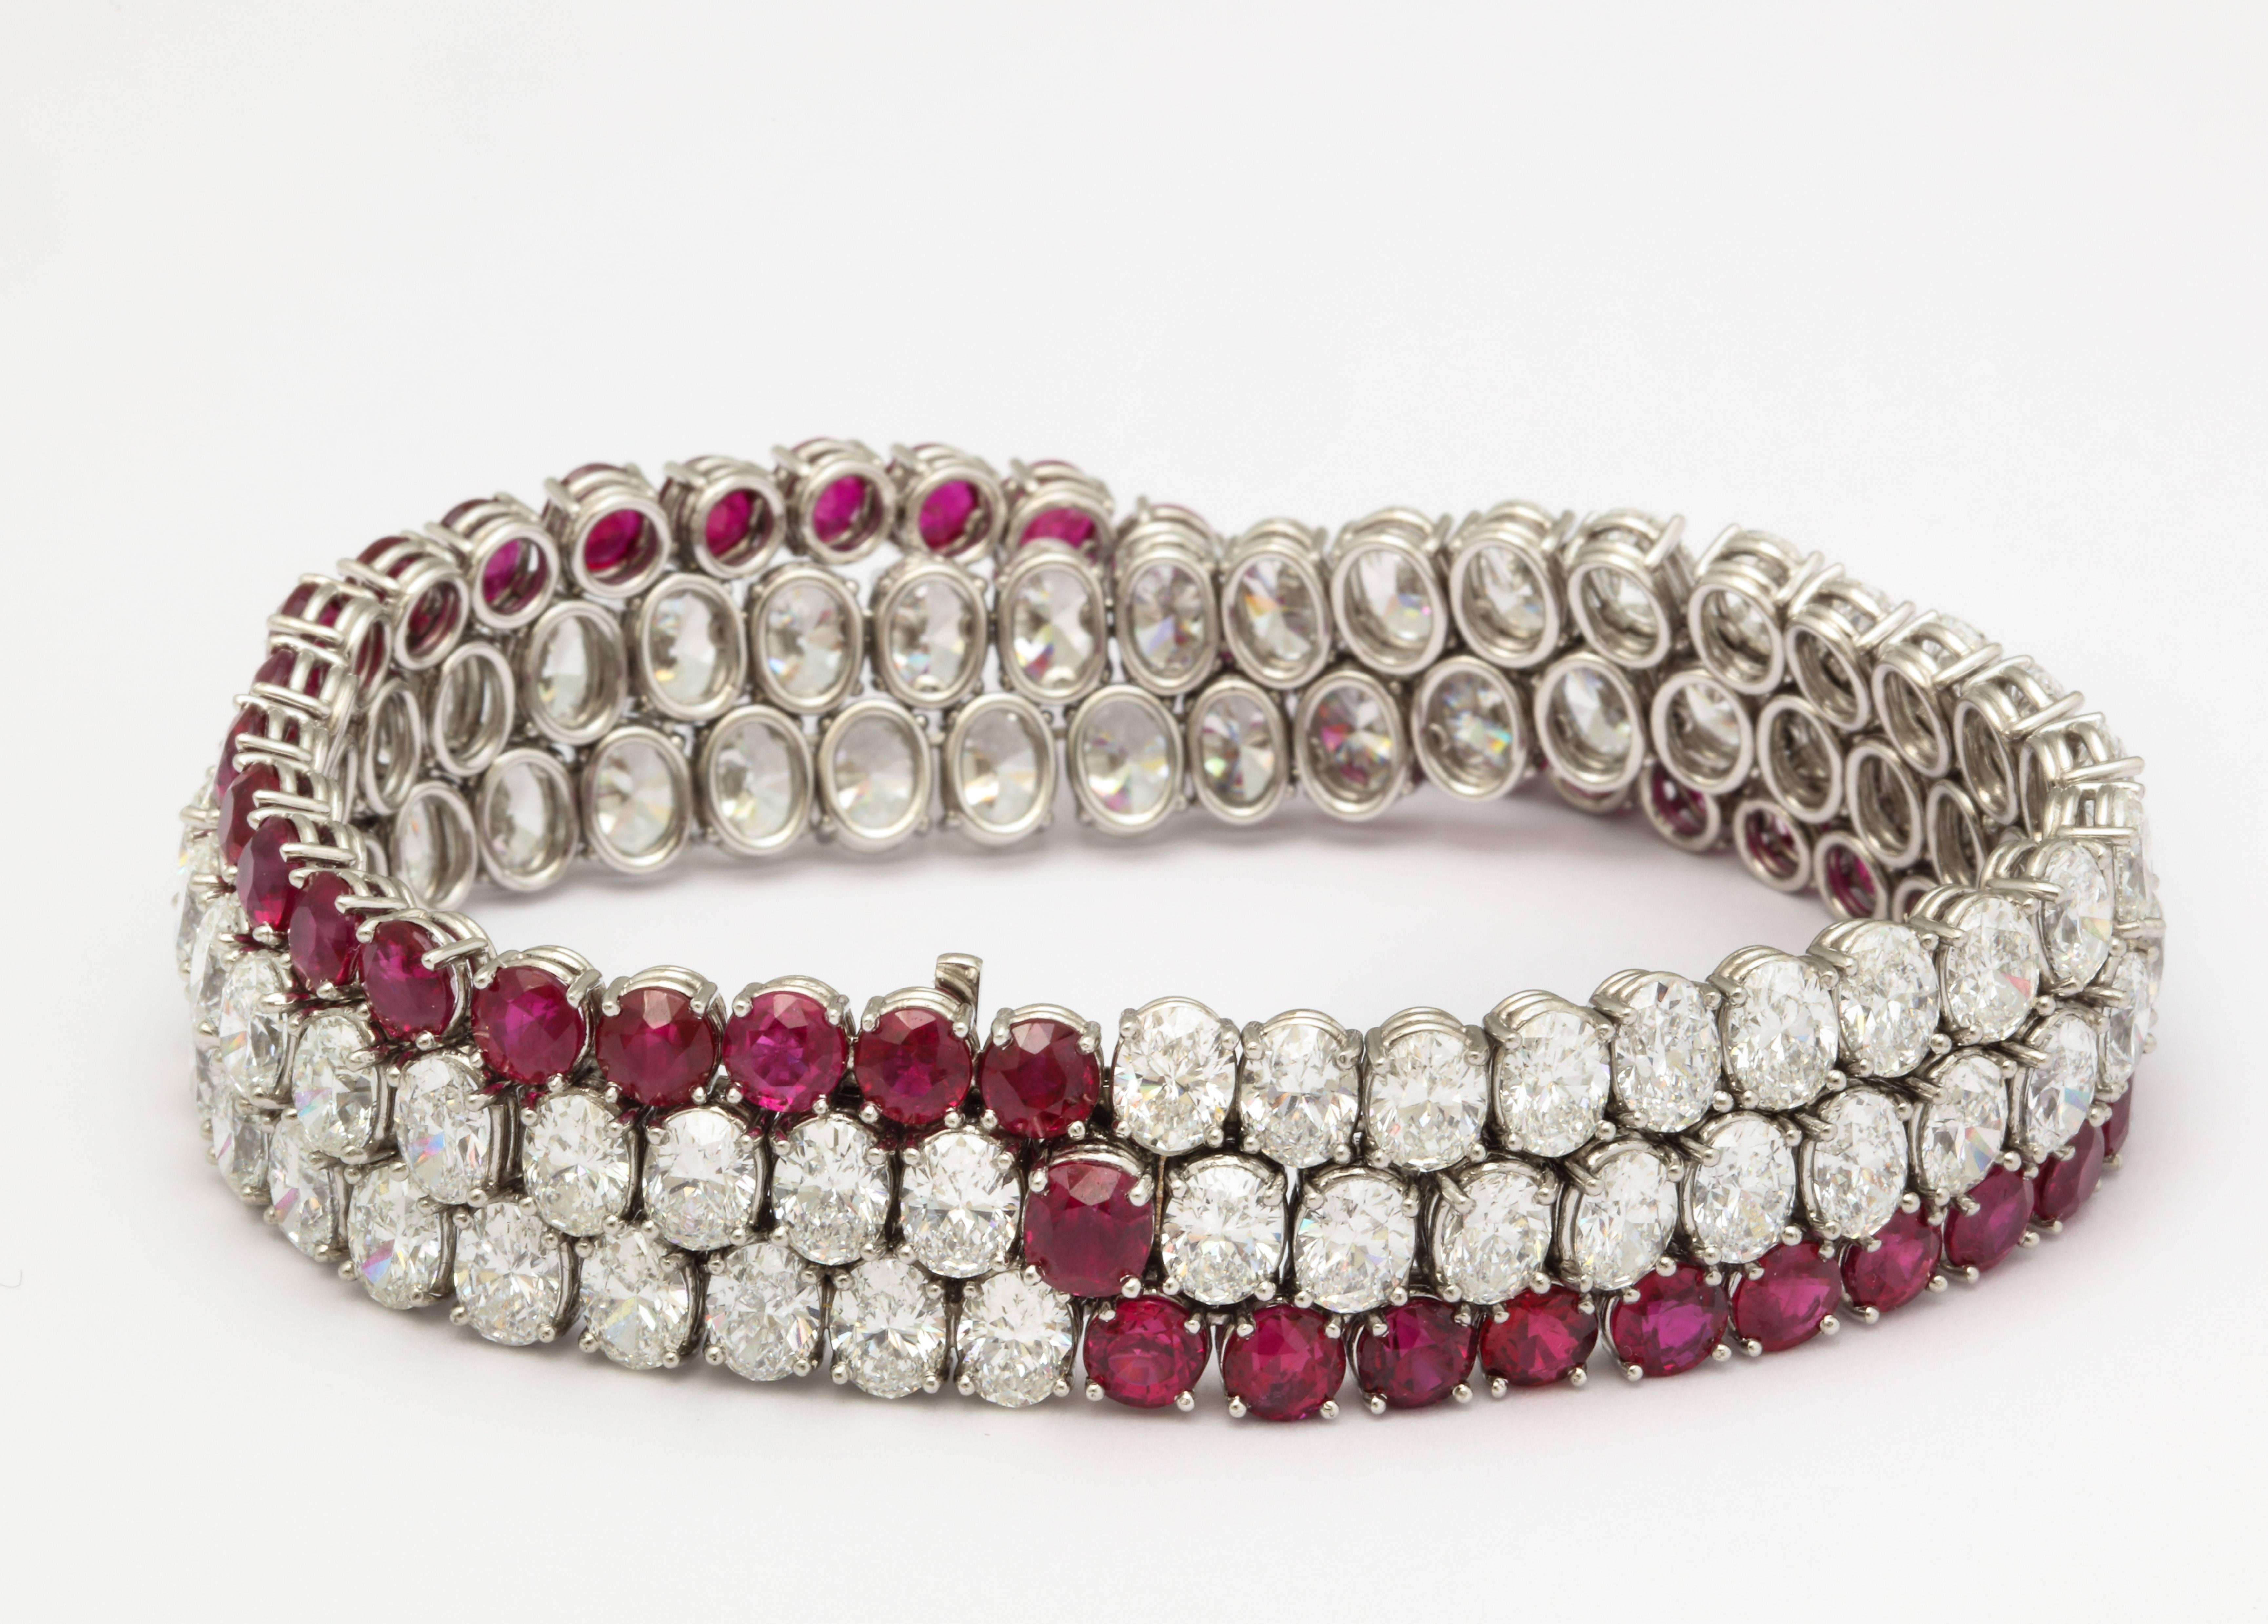 This spectacular bracelet is set with 41 round, natural (no heat treatment) Burmese rubies, weighing a total of 21.59cts and 76 oval diamonds with a total weight of 34.51cts.  The wonderfully supple mounting was expertly crafted in platinum just for